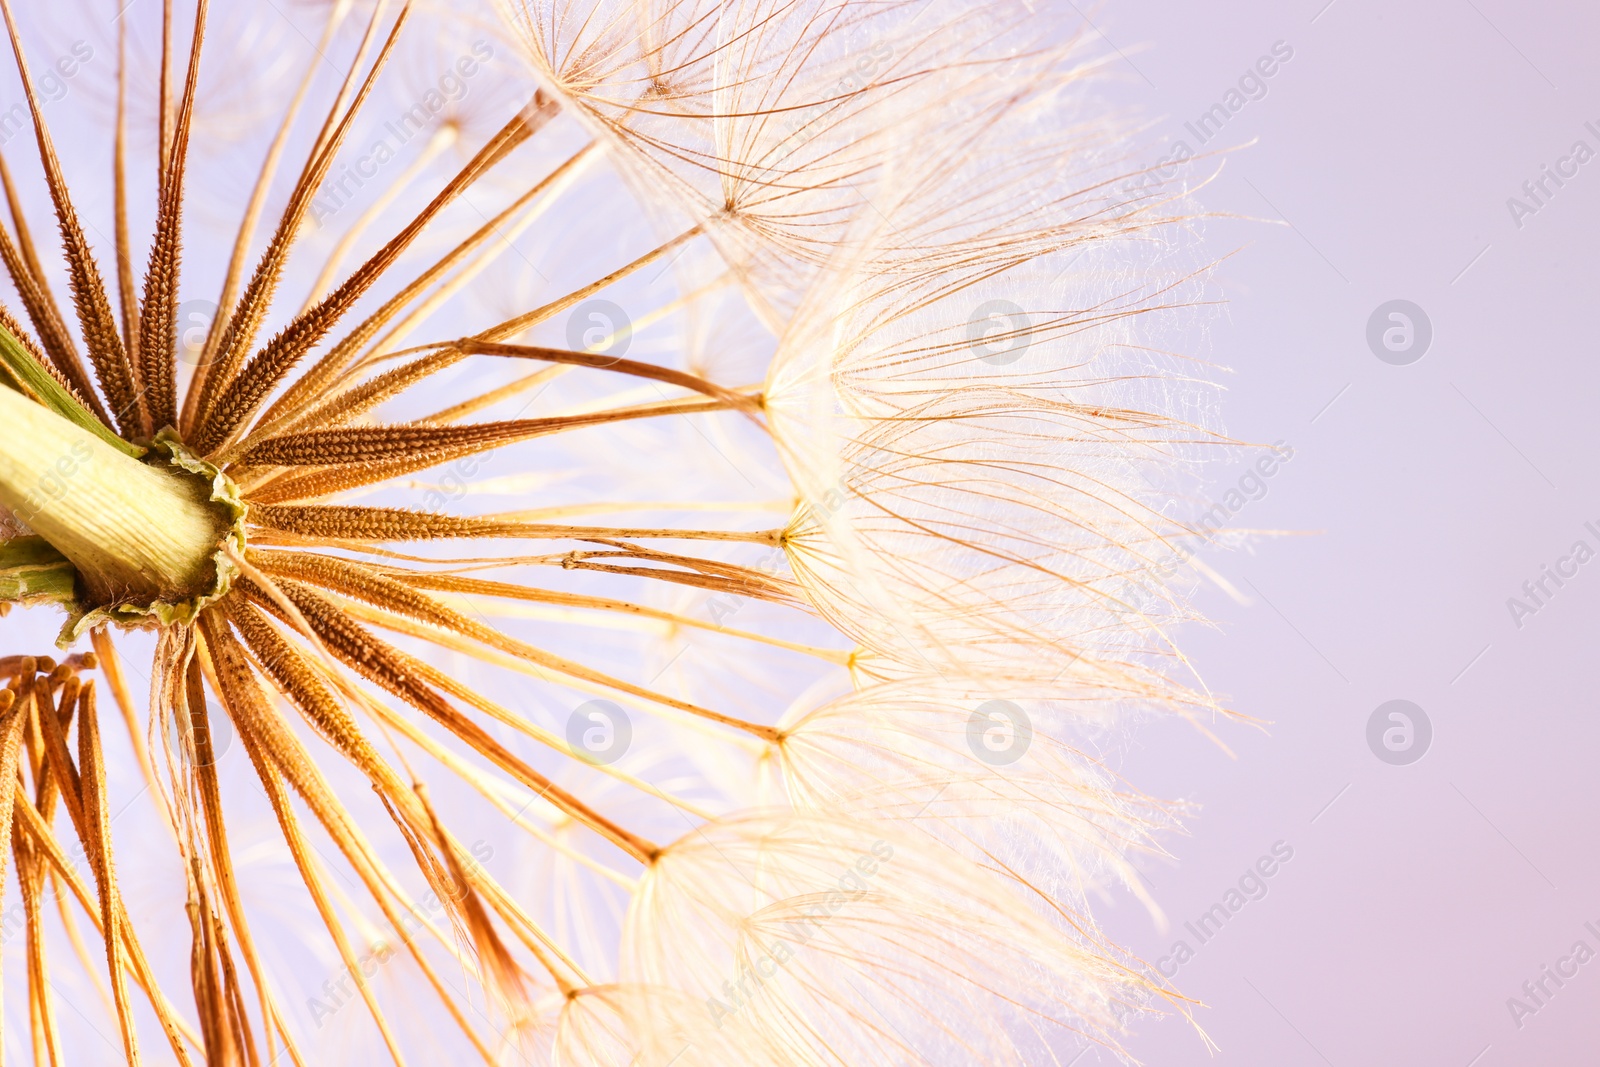 Photo of Dandelion seed head on color background, close up